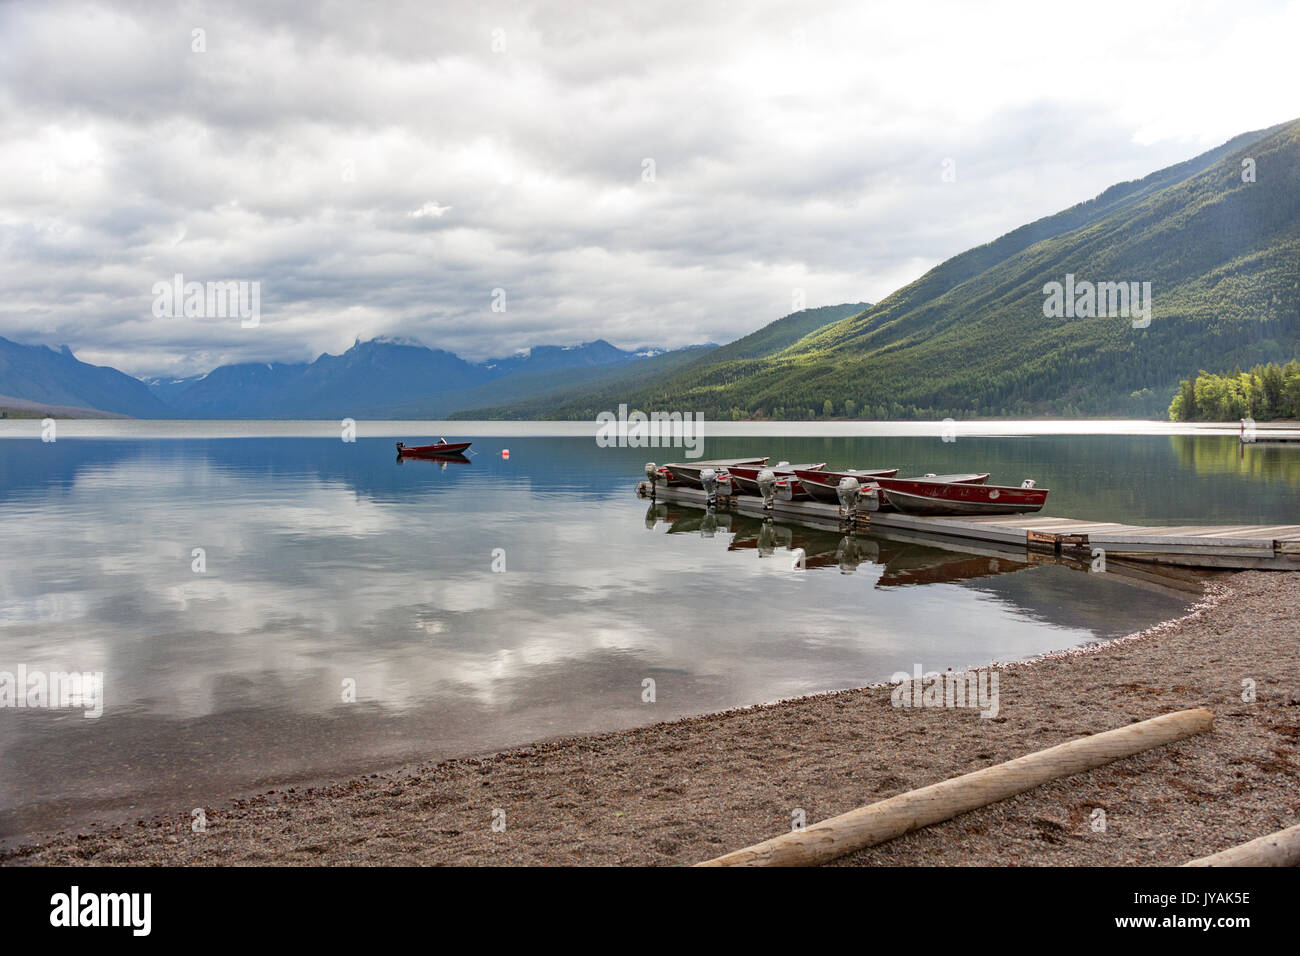 Category:   Boats on the Pier with Mountain-range background and mirror-like Lake McDonald with Cloud reflections Stock Photo